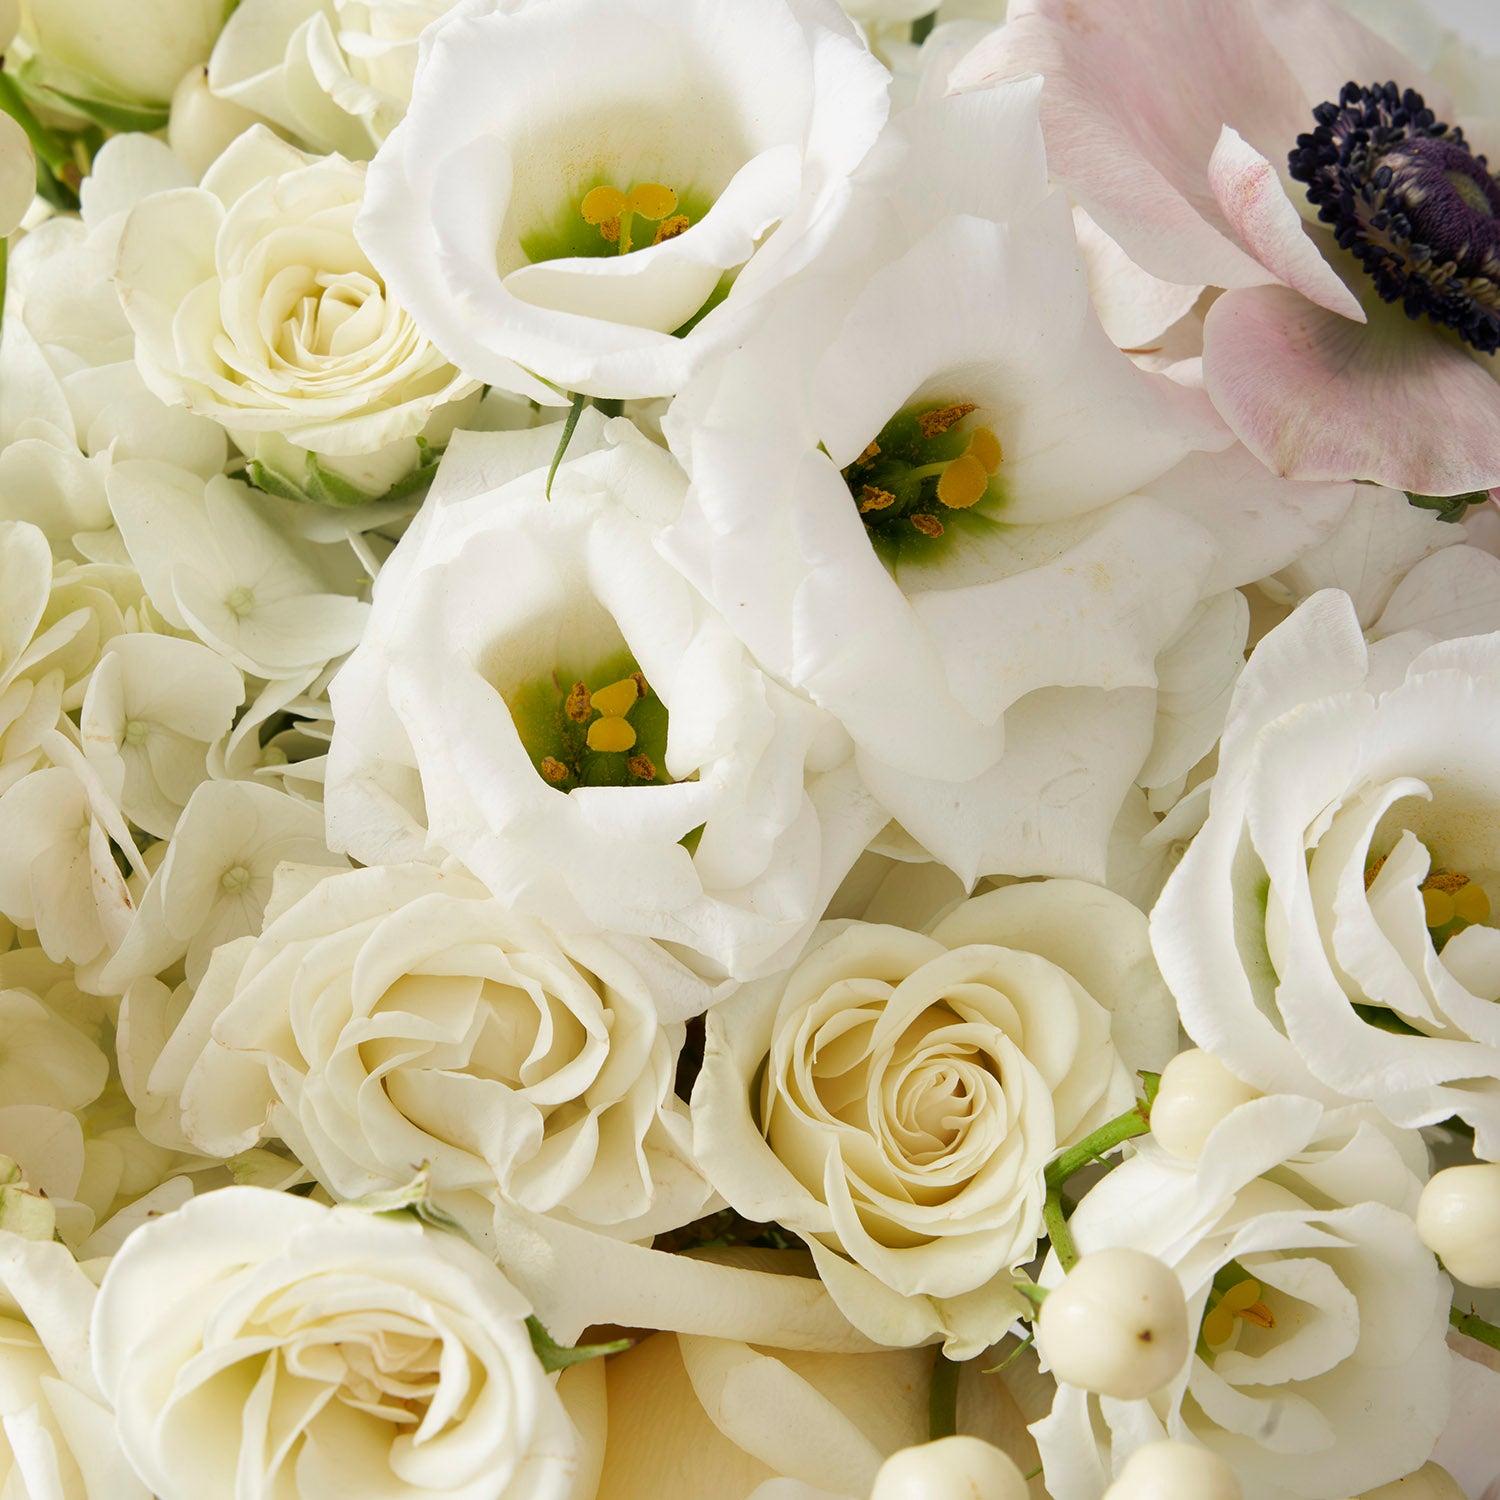 Closeup of white roses, white lisyanthus and white hypericum berries.